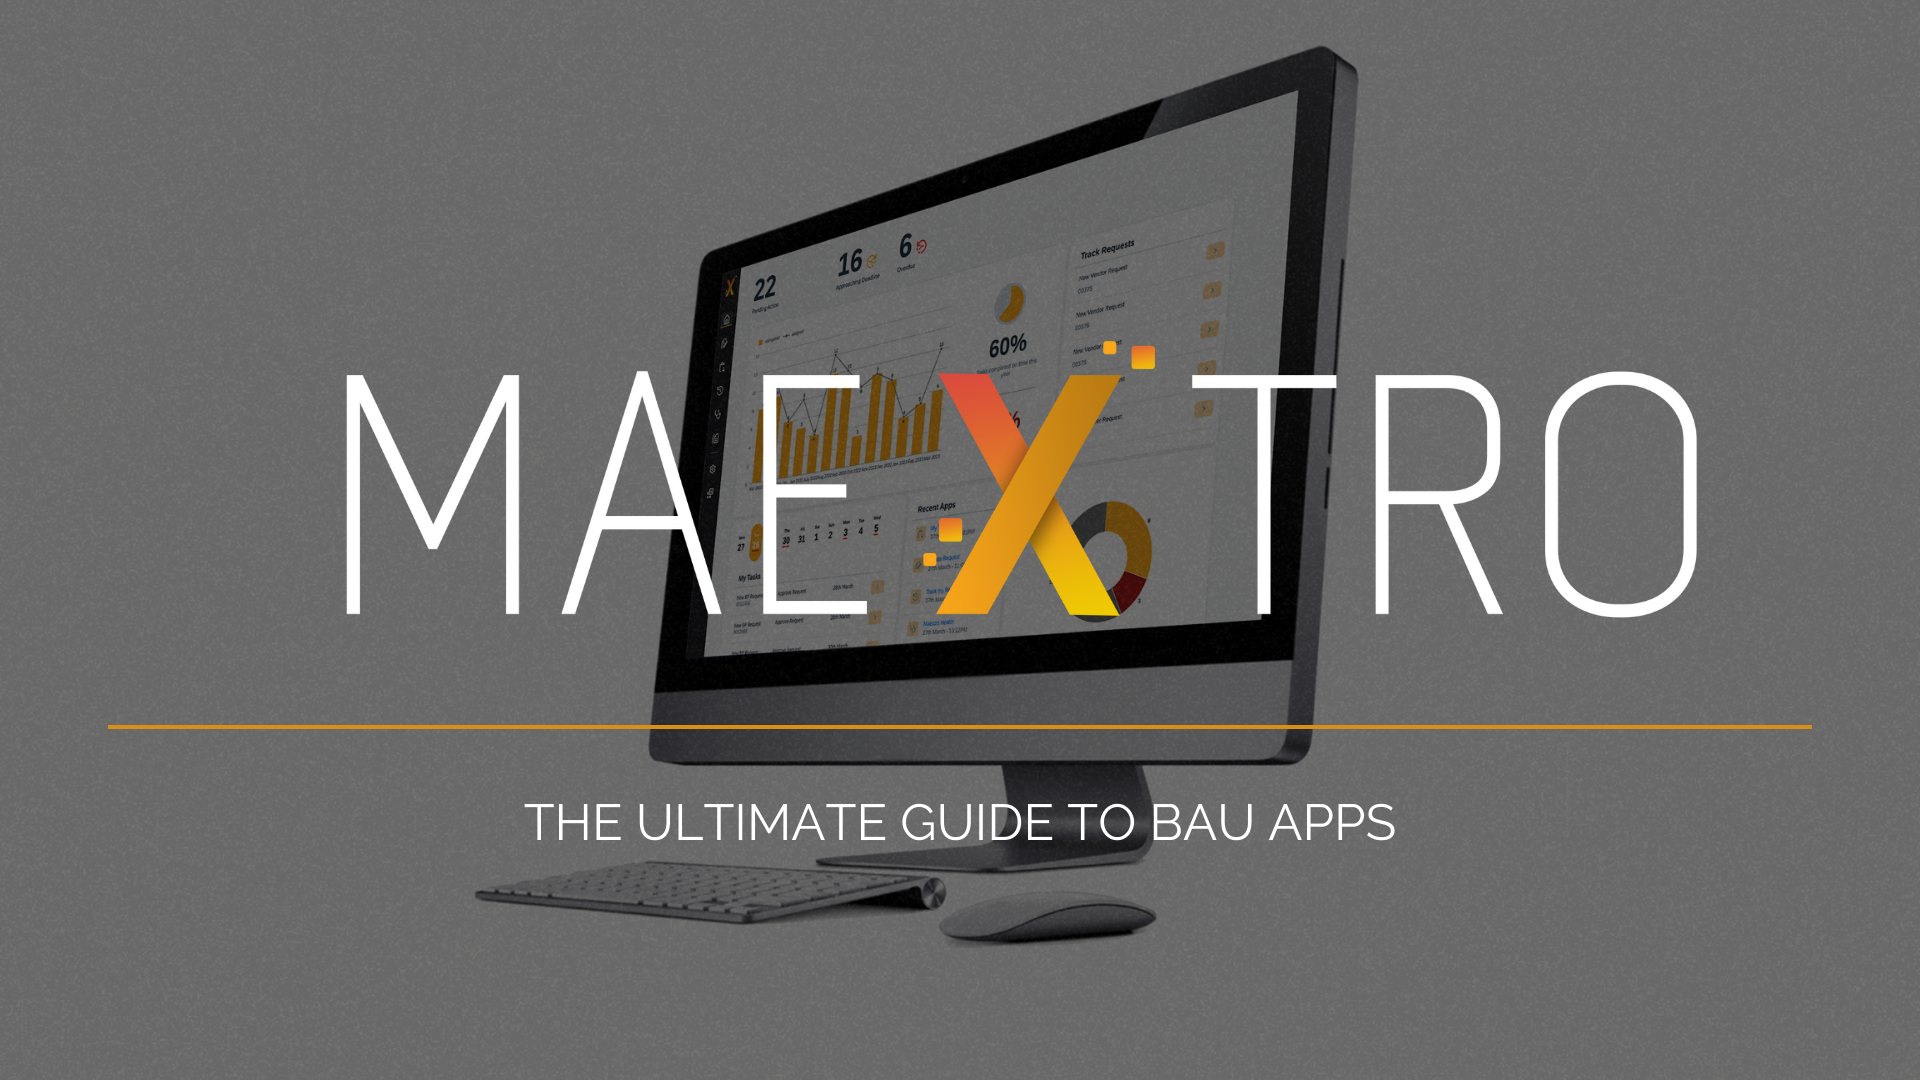 The Ultimate Guide to BAU apps